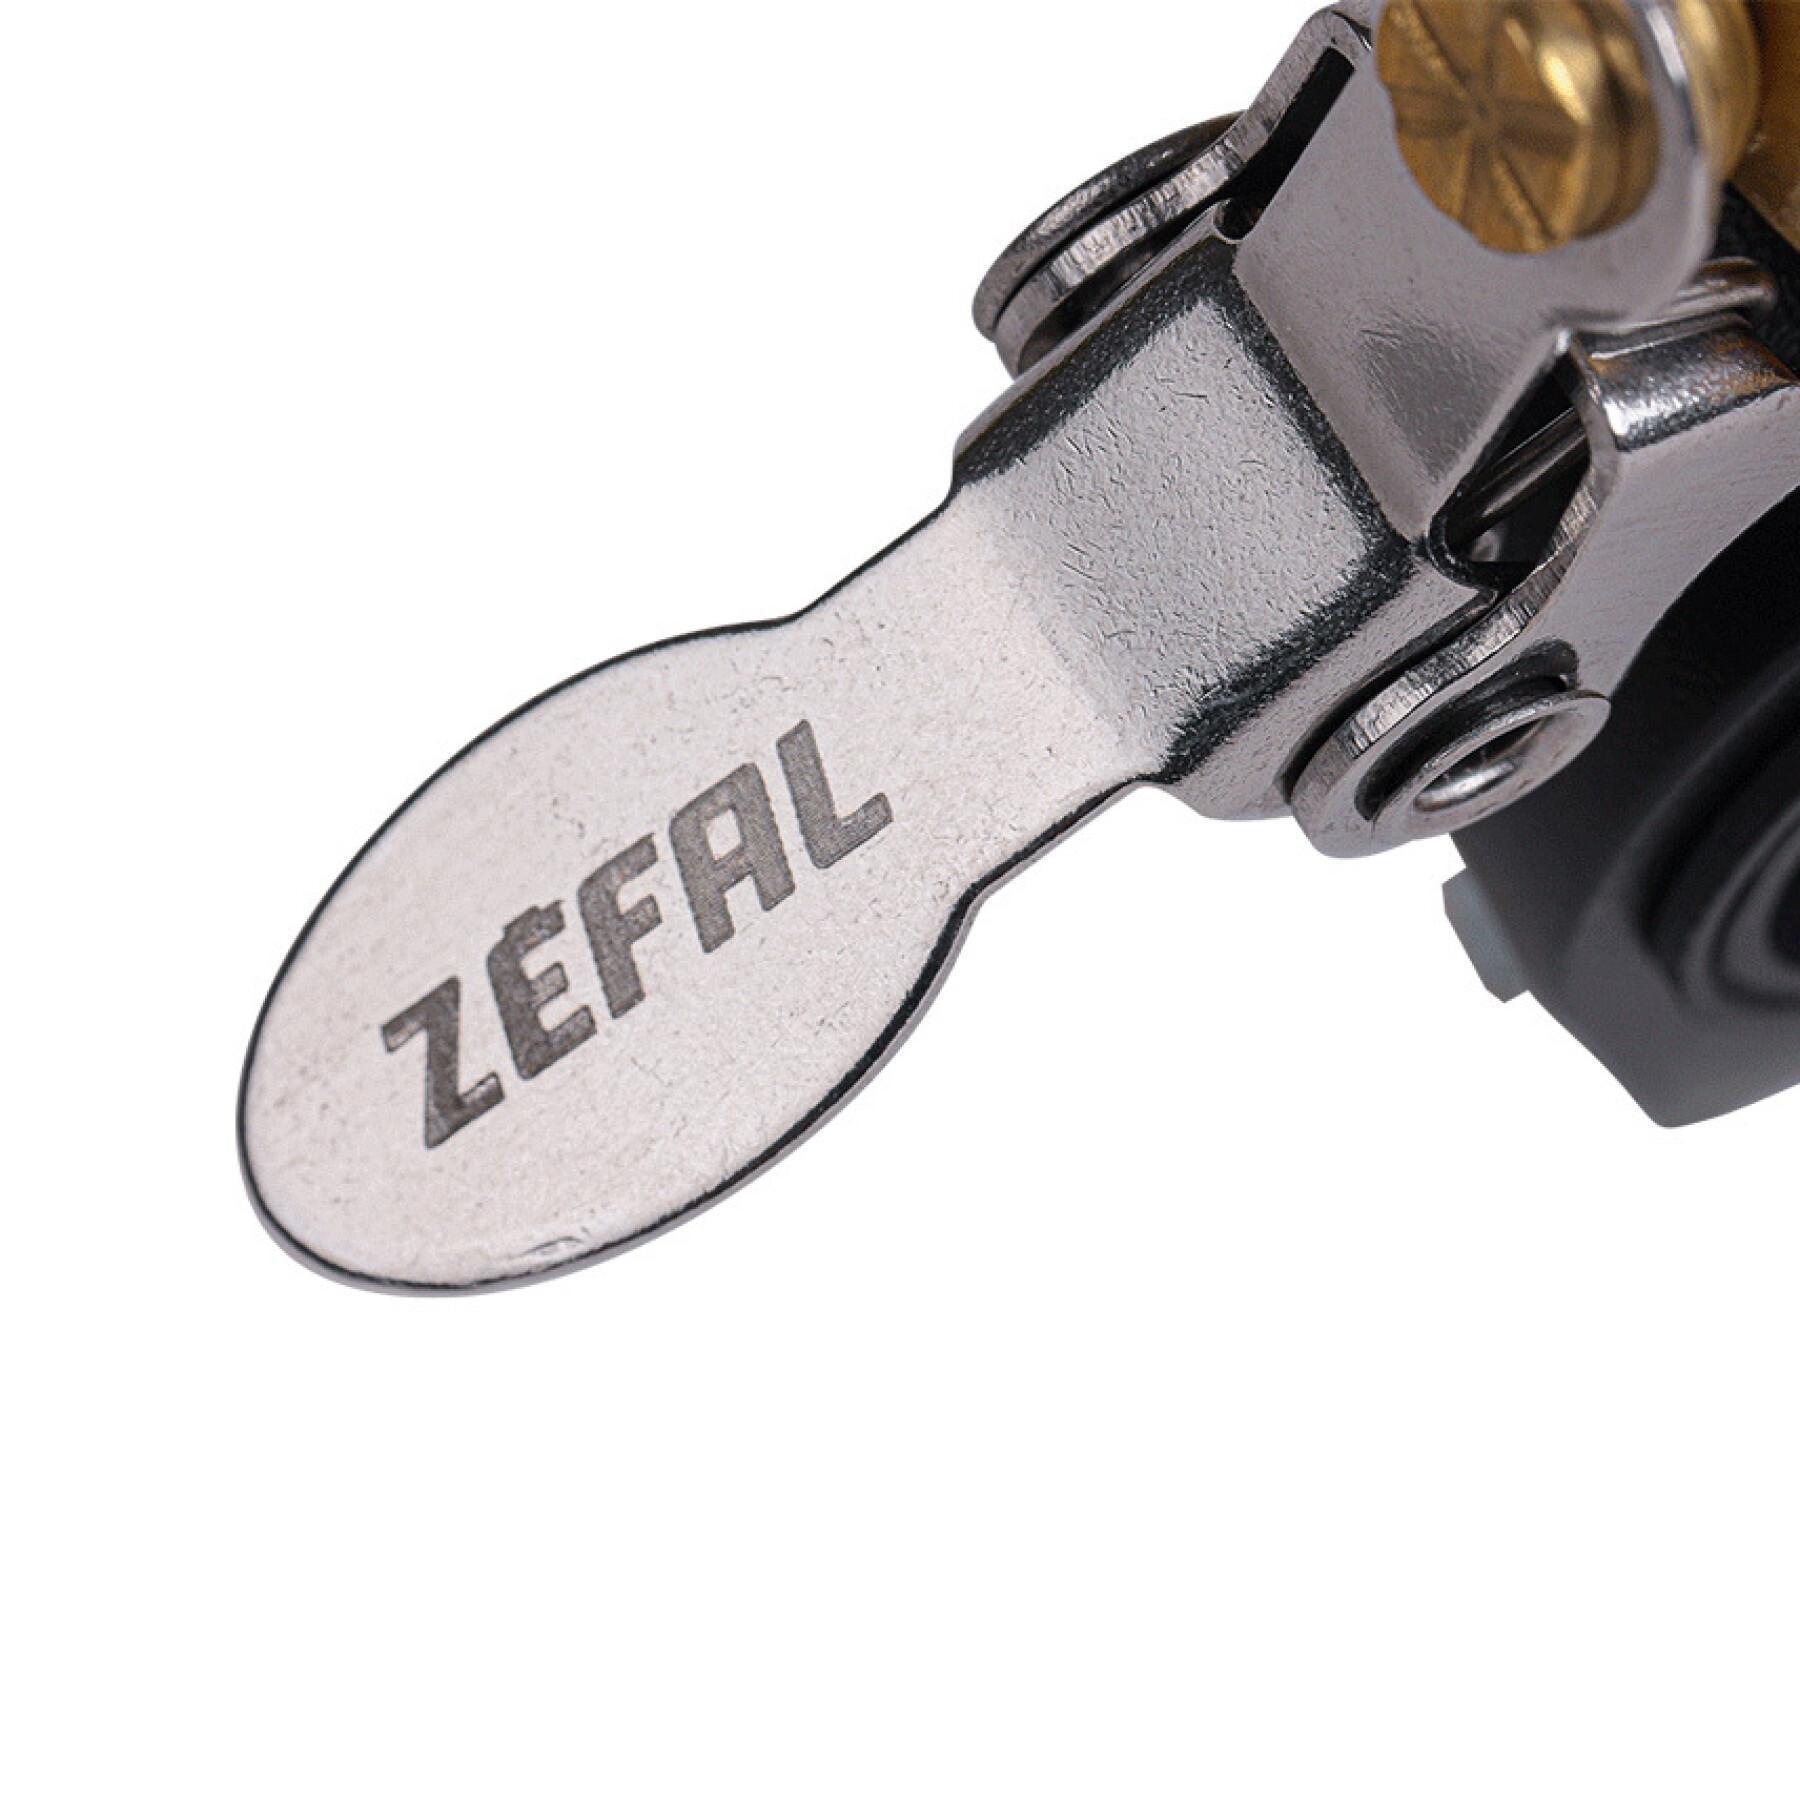 Bell ping classic tool-free assembly Zefal Classic